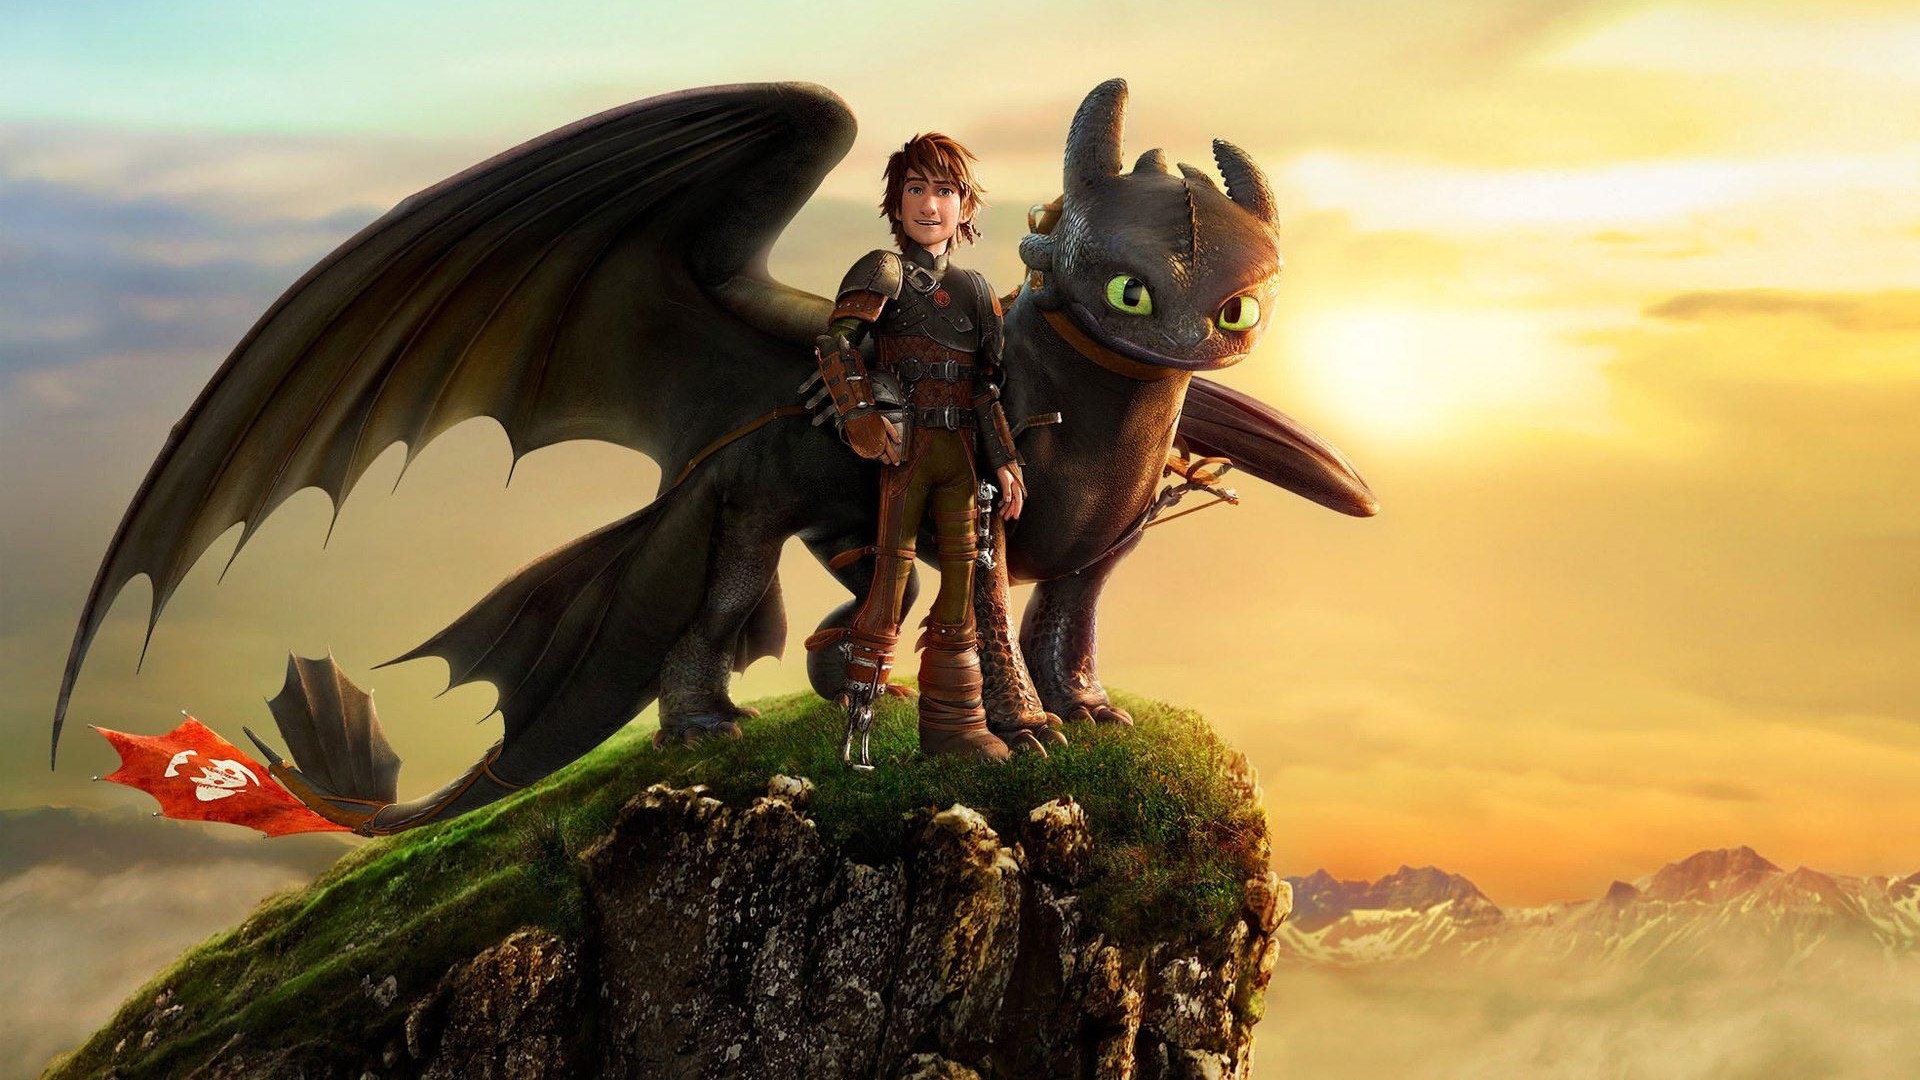 1920x1080 Toothless the Dragon images Night Fury Wallpaper HD